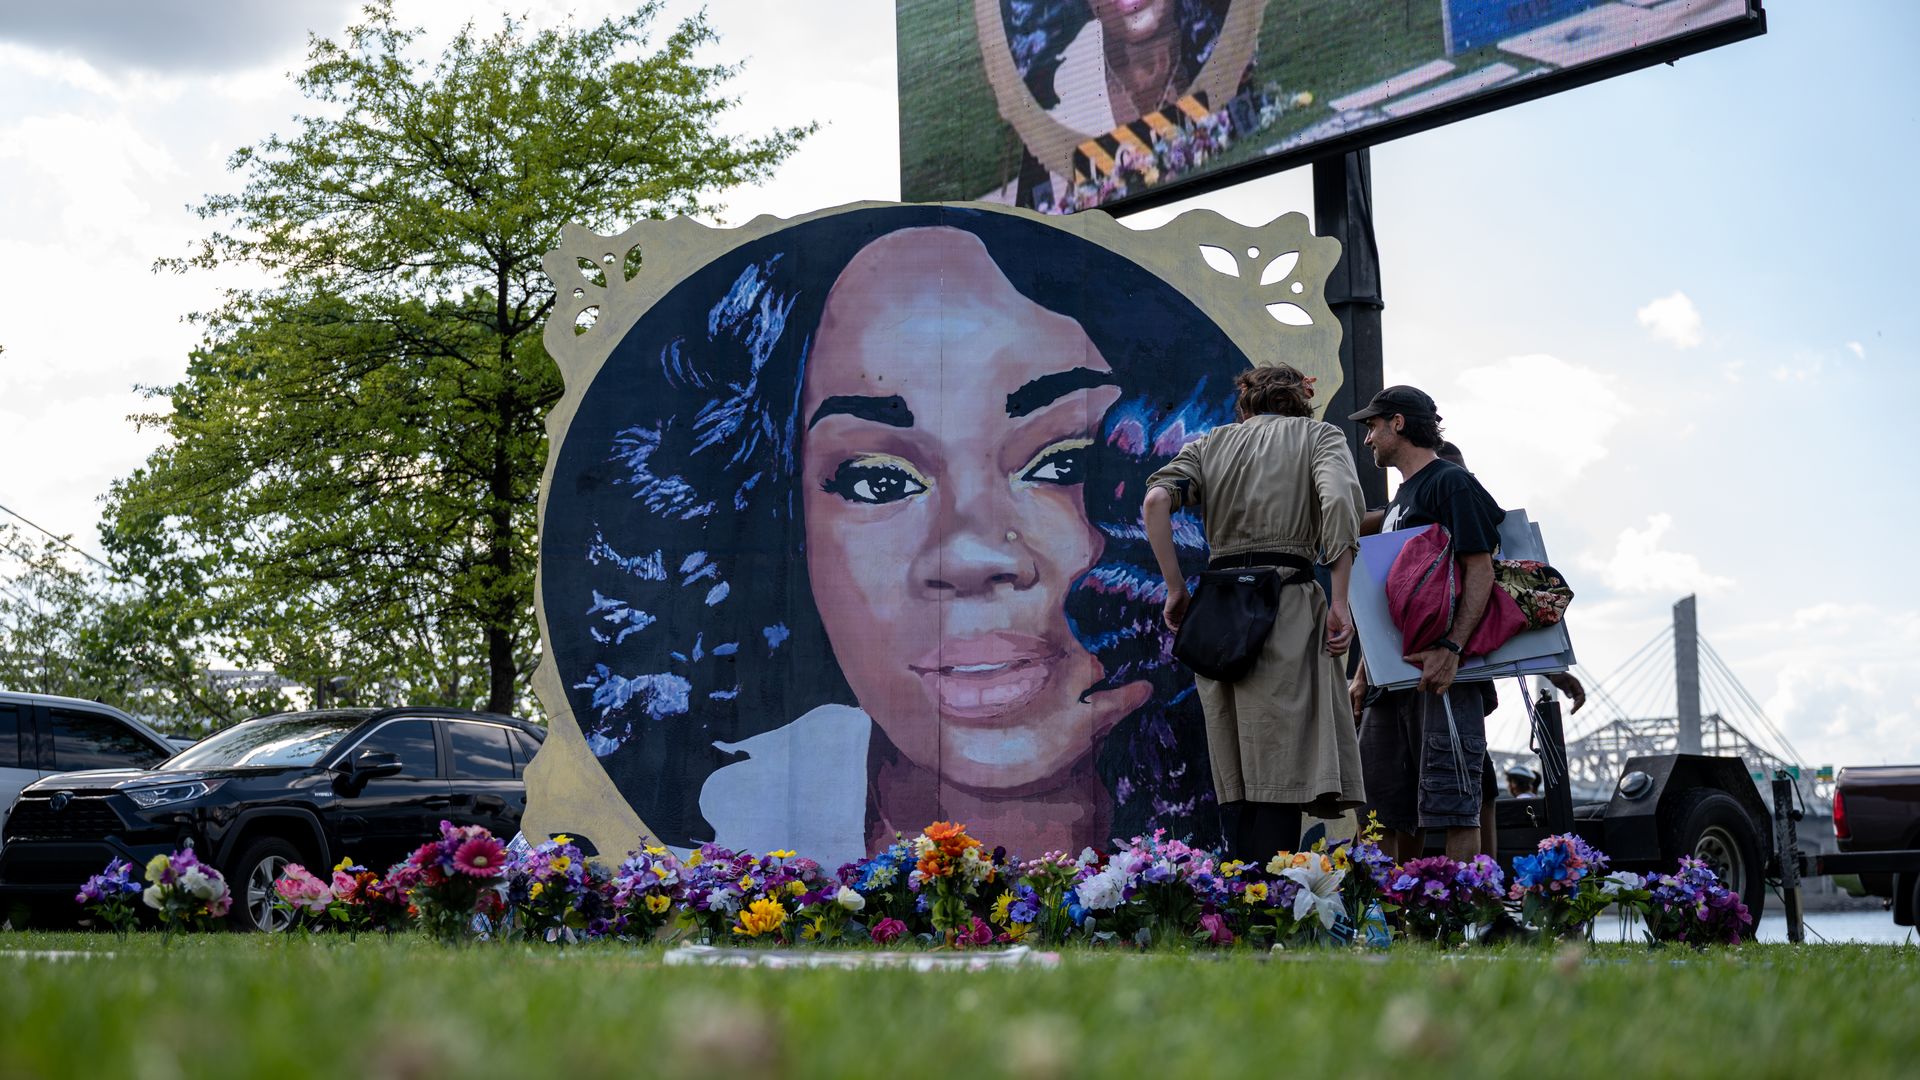 Photo of a mural of Breonna Taylor propped up on a grassy lawn